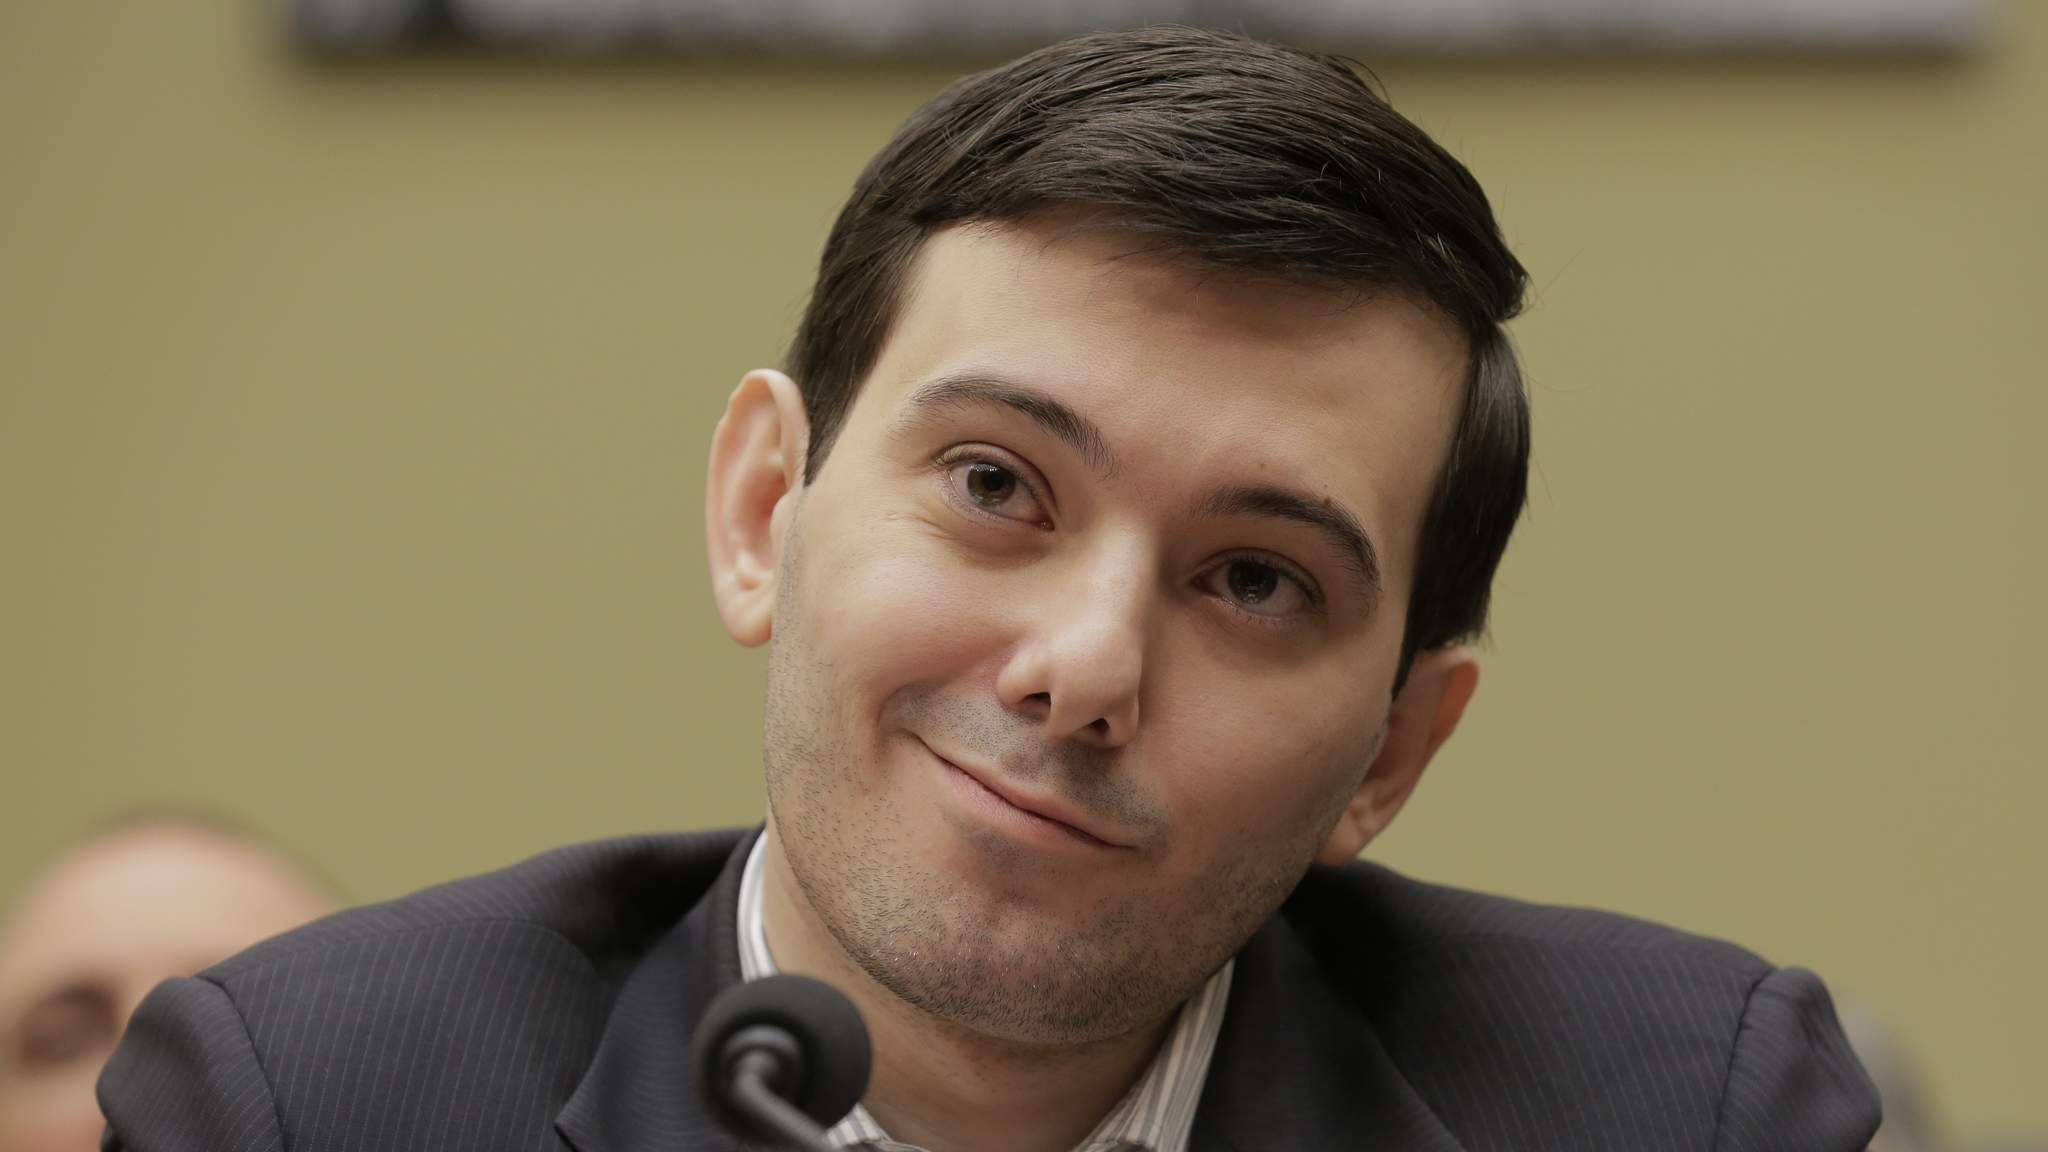 Martin Shkreli Man who made huge profits by inflating price of life